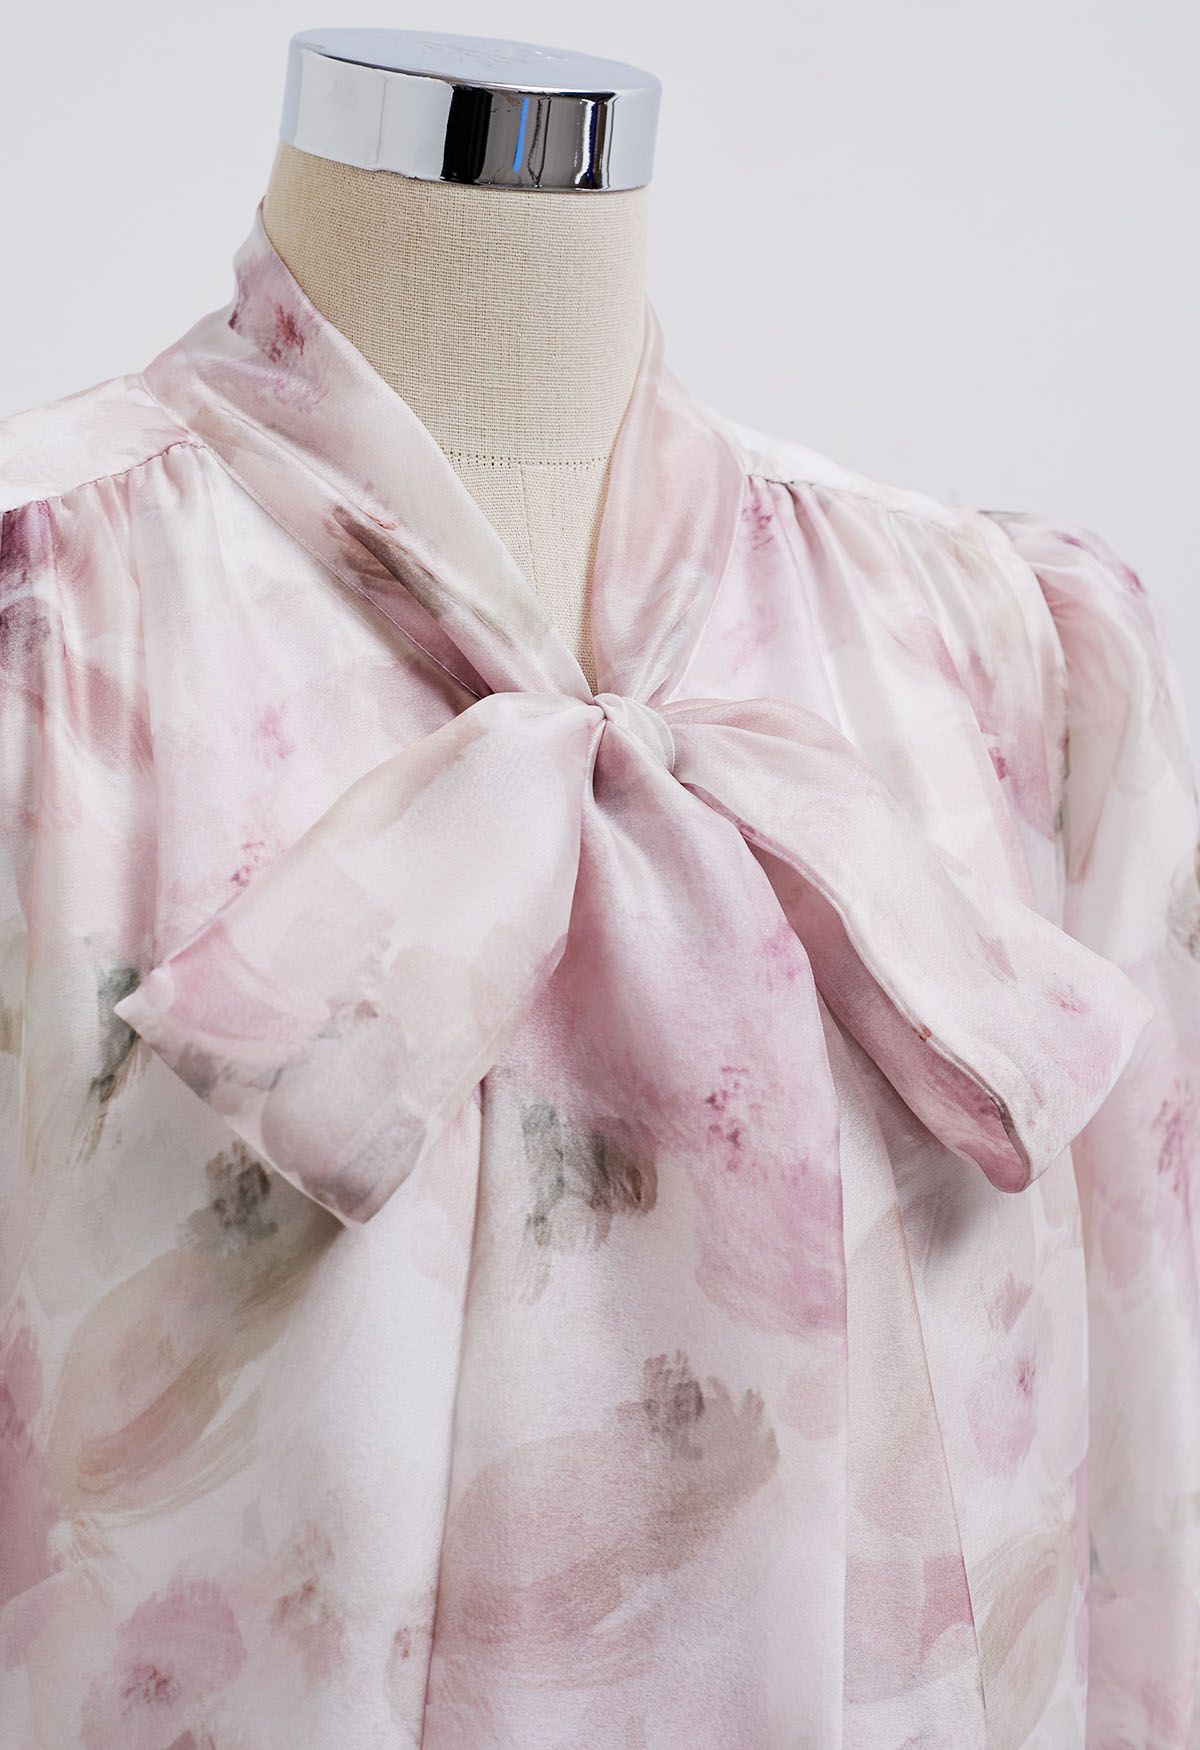 Bowknot Neck Watercolor Floral Sheer Shirt in Pink